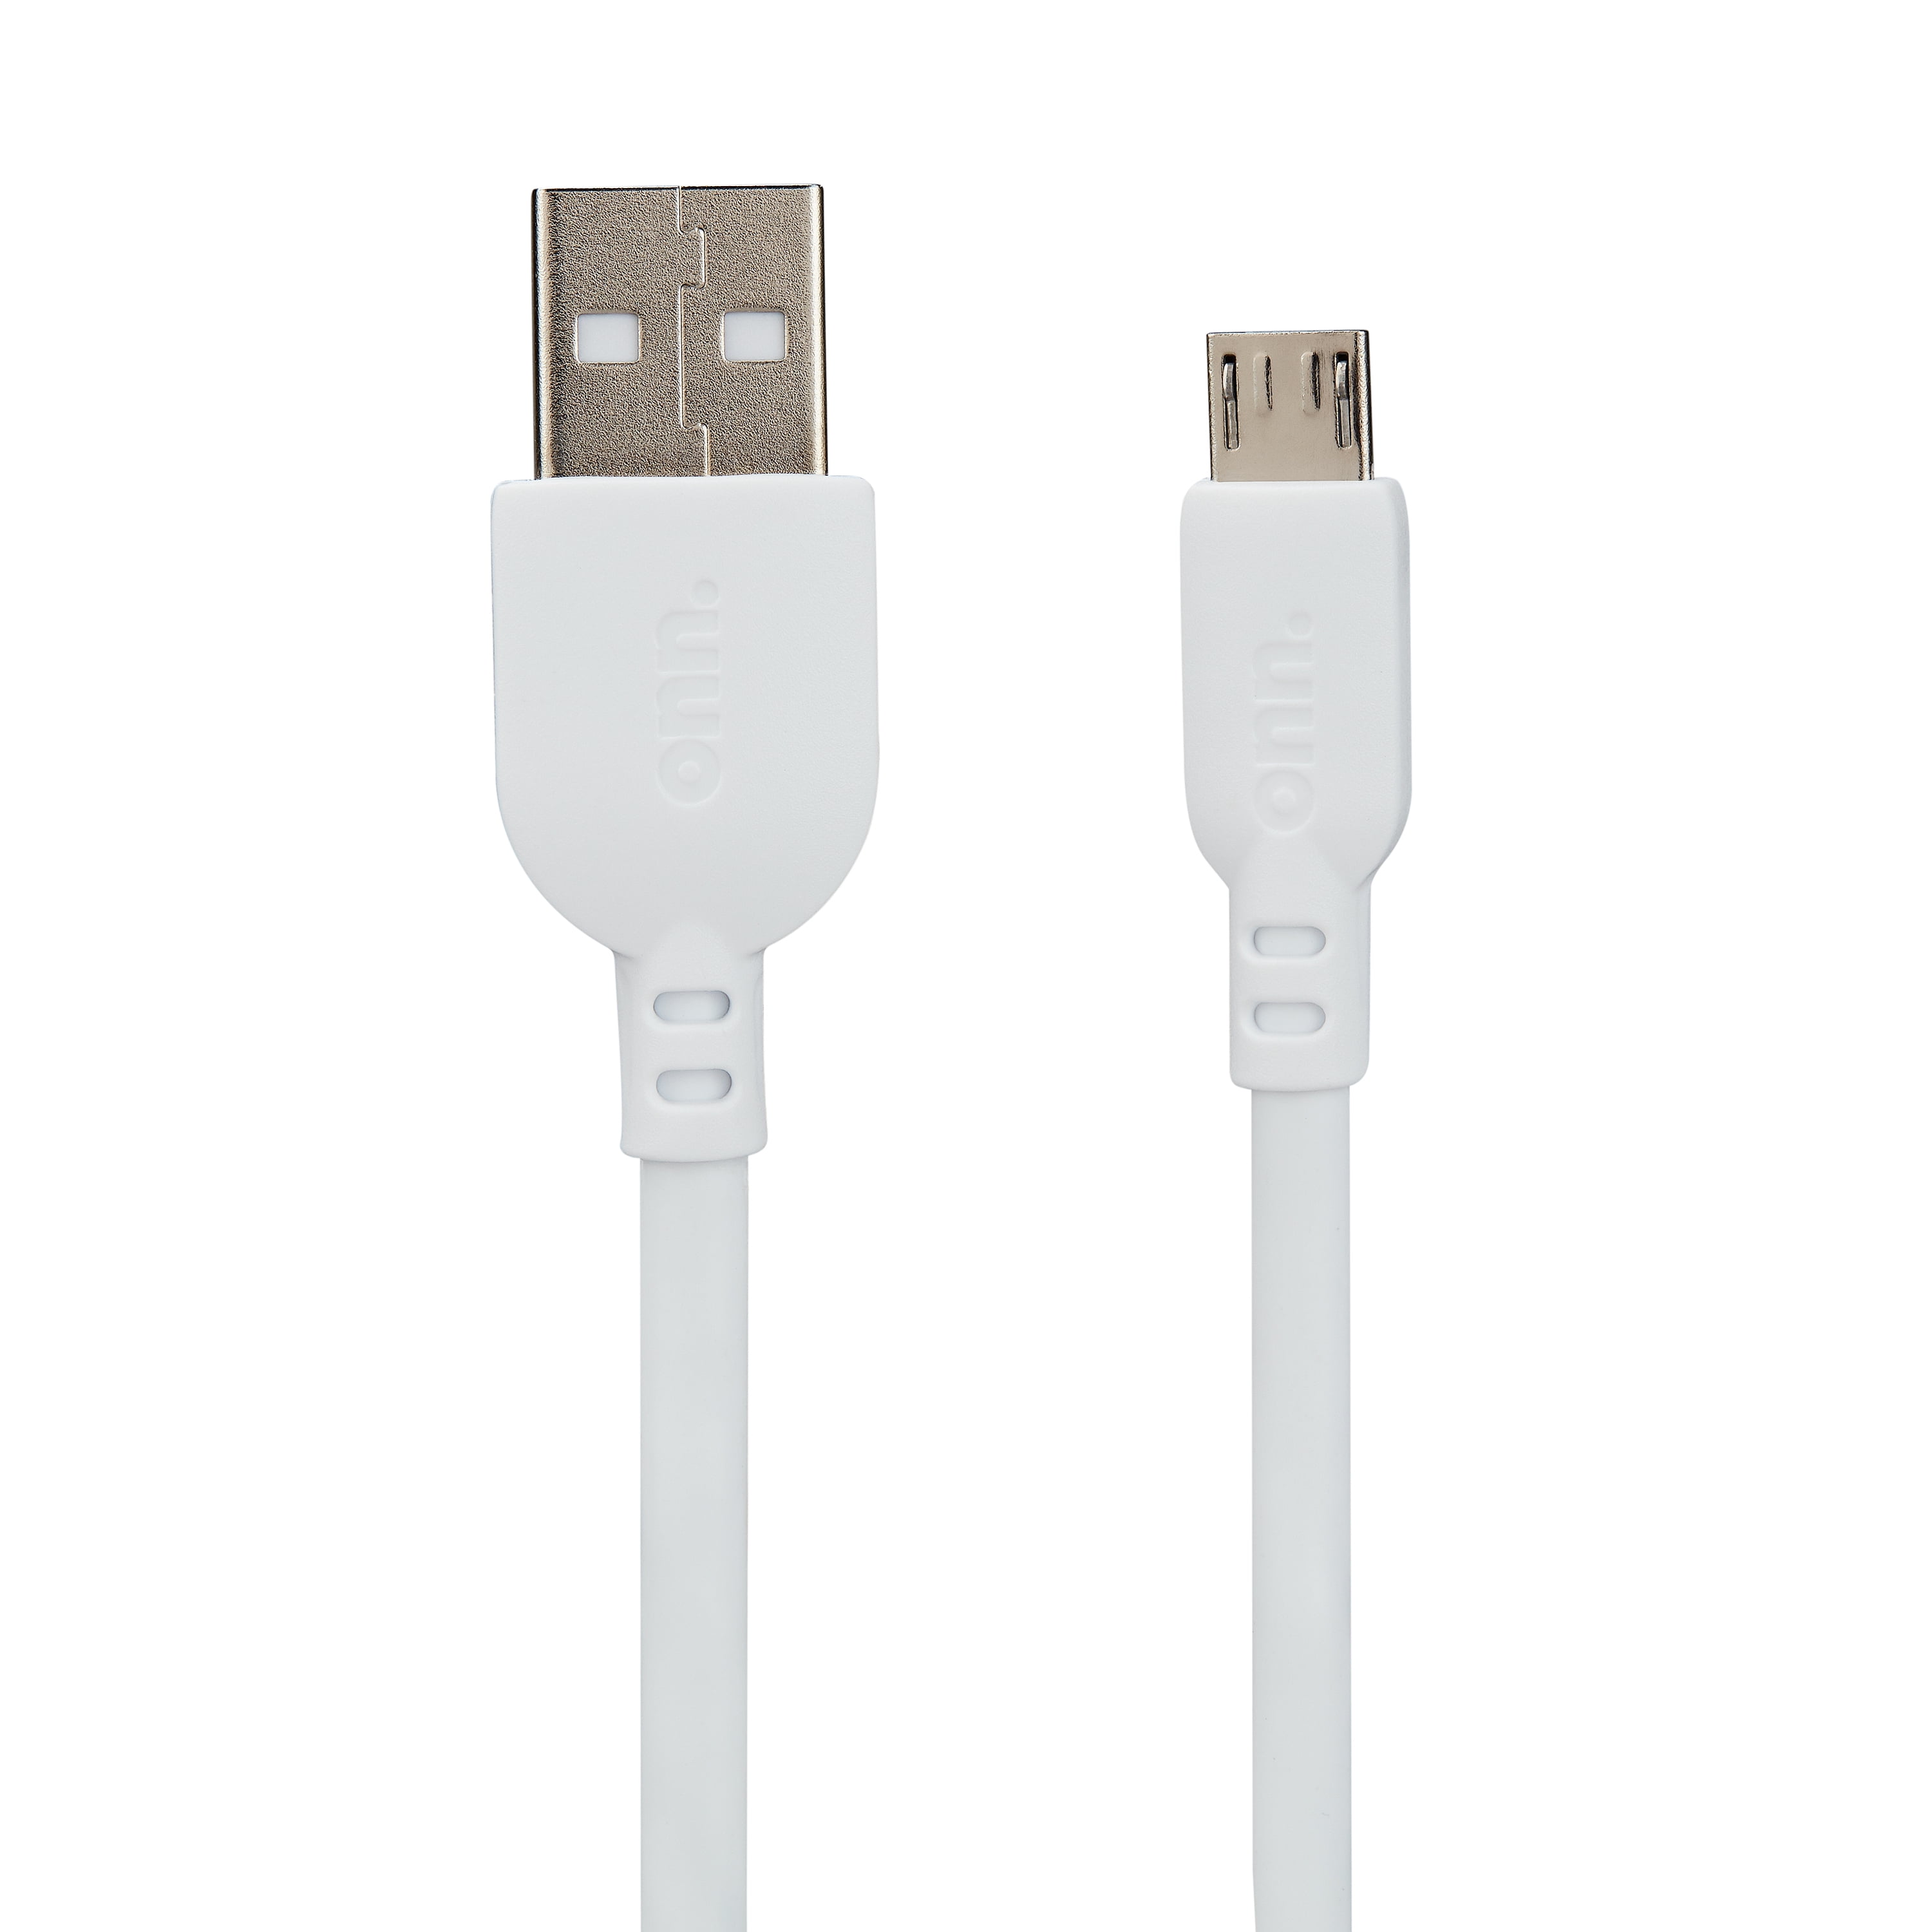 onn. Micro-USB to USB Cable, 3 ft, White